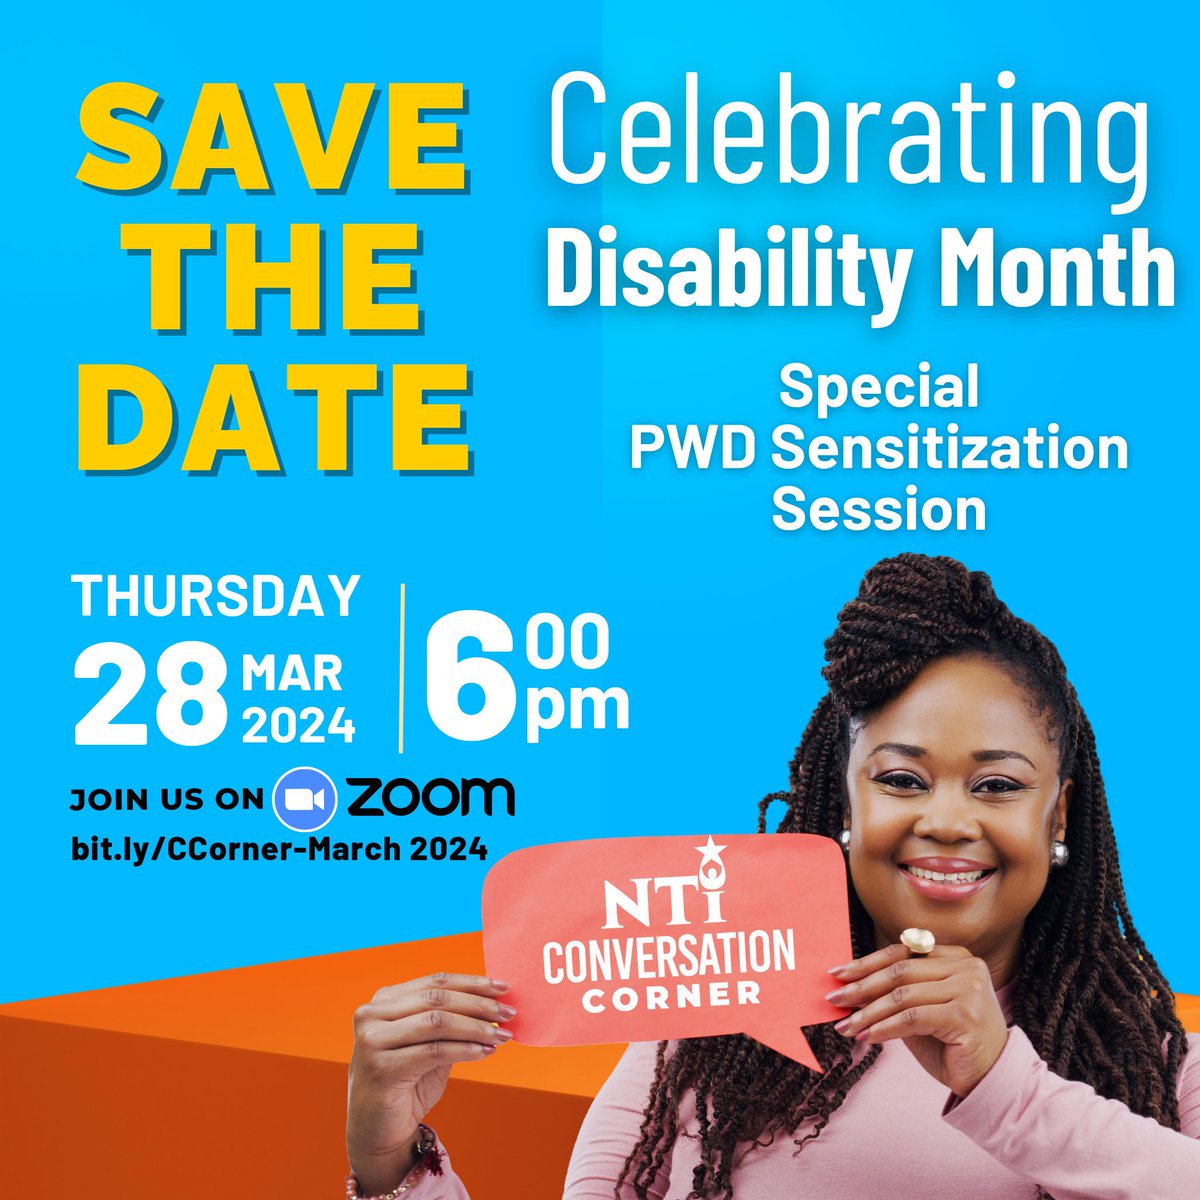 It's soon time for NTI's Conversation Corner!

Join us for our insightful session on Thursday March 28th at 6pm via the Zoom link in our bio!

We can't wait to see you then!

#NTI #ConversationCorner #PWD #PressForwardWithNTI